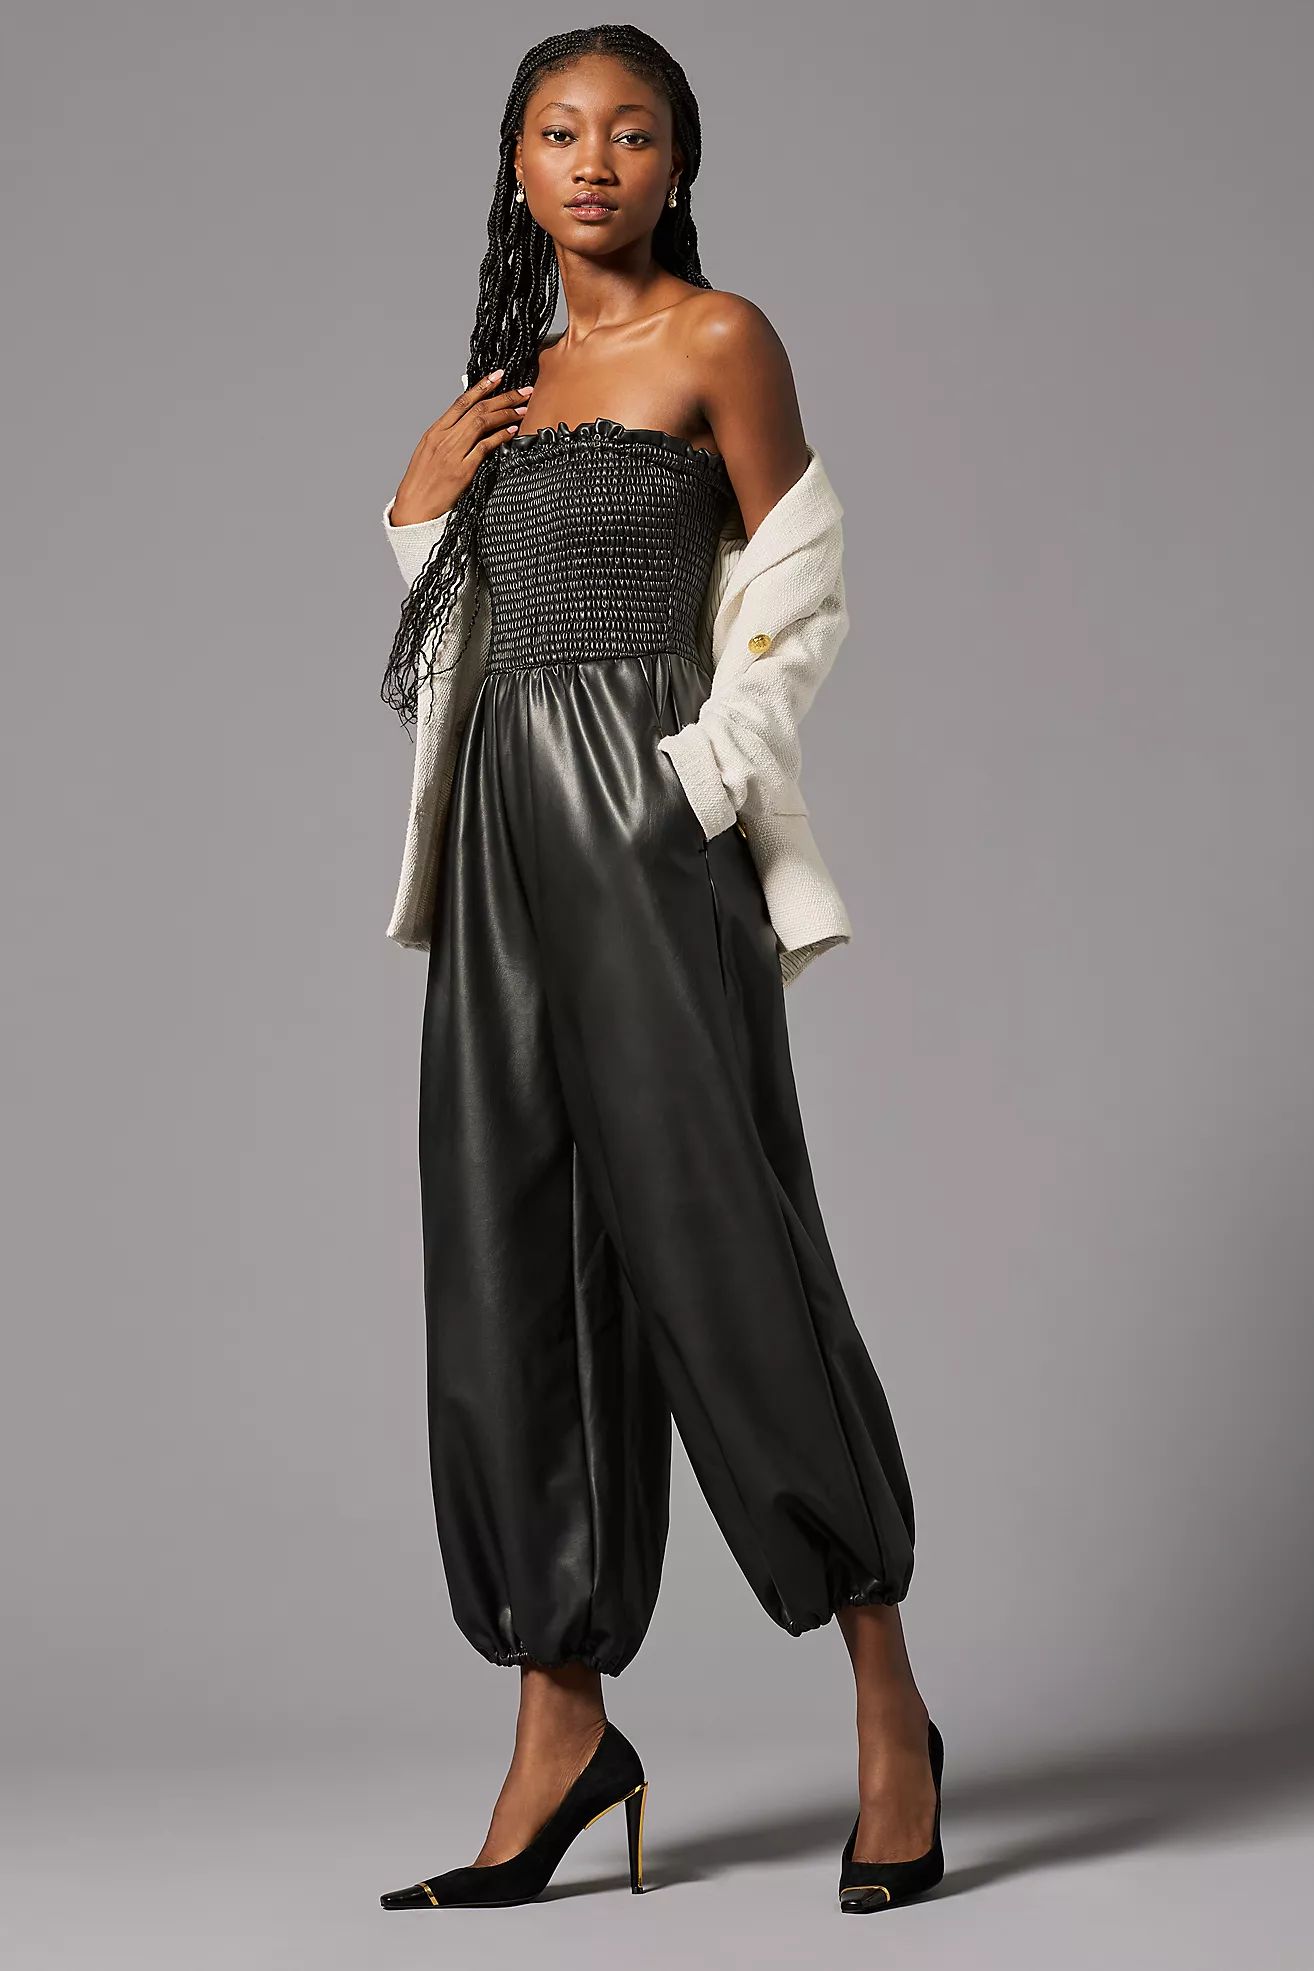 By Anthropologie Faux Leather Balloon Jumpsuit | Anthropologie (US)